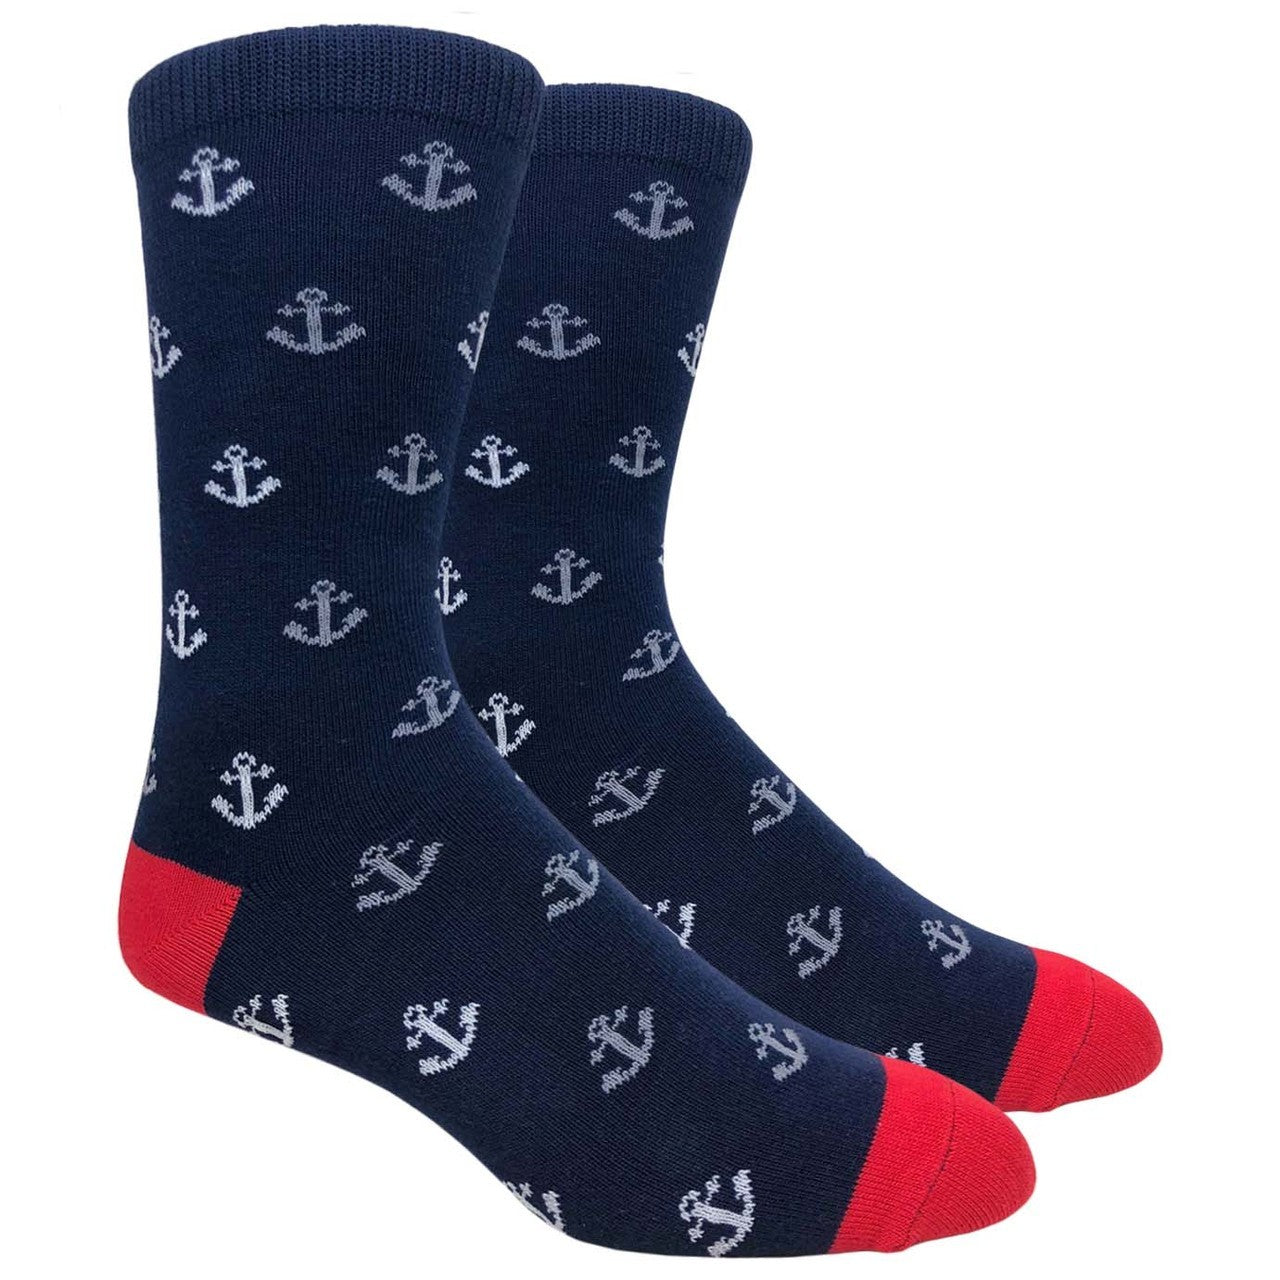 Black Label Men's Dress Socks - Anchors - Navy with Red